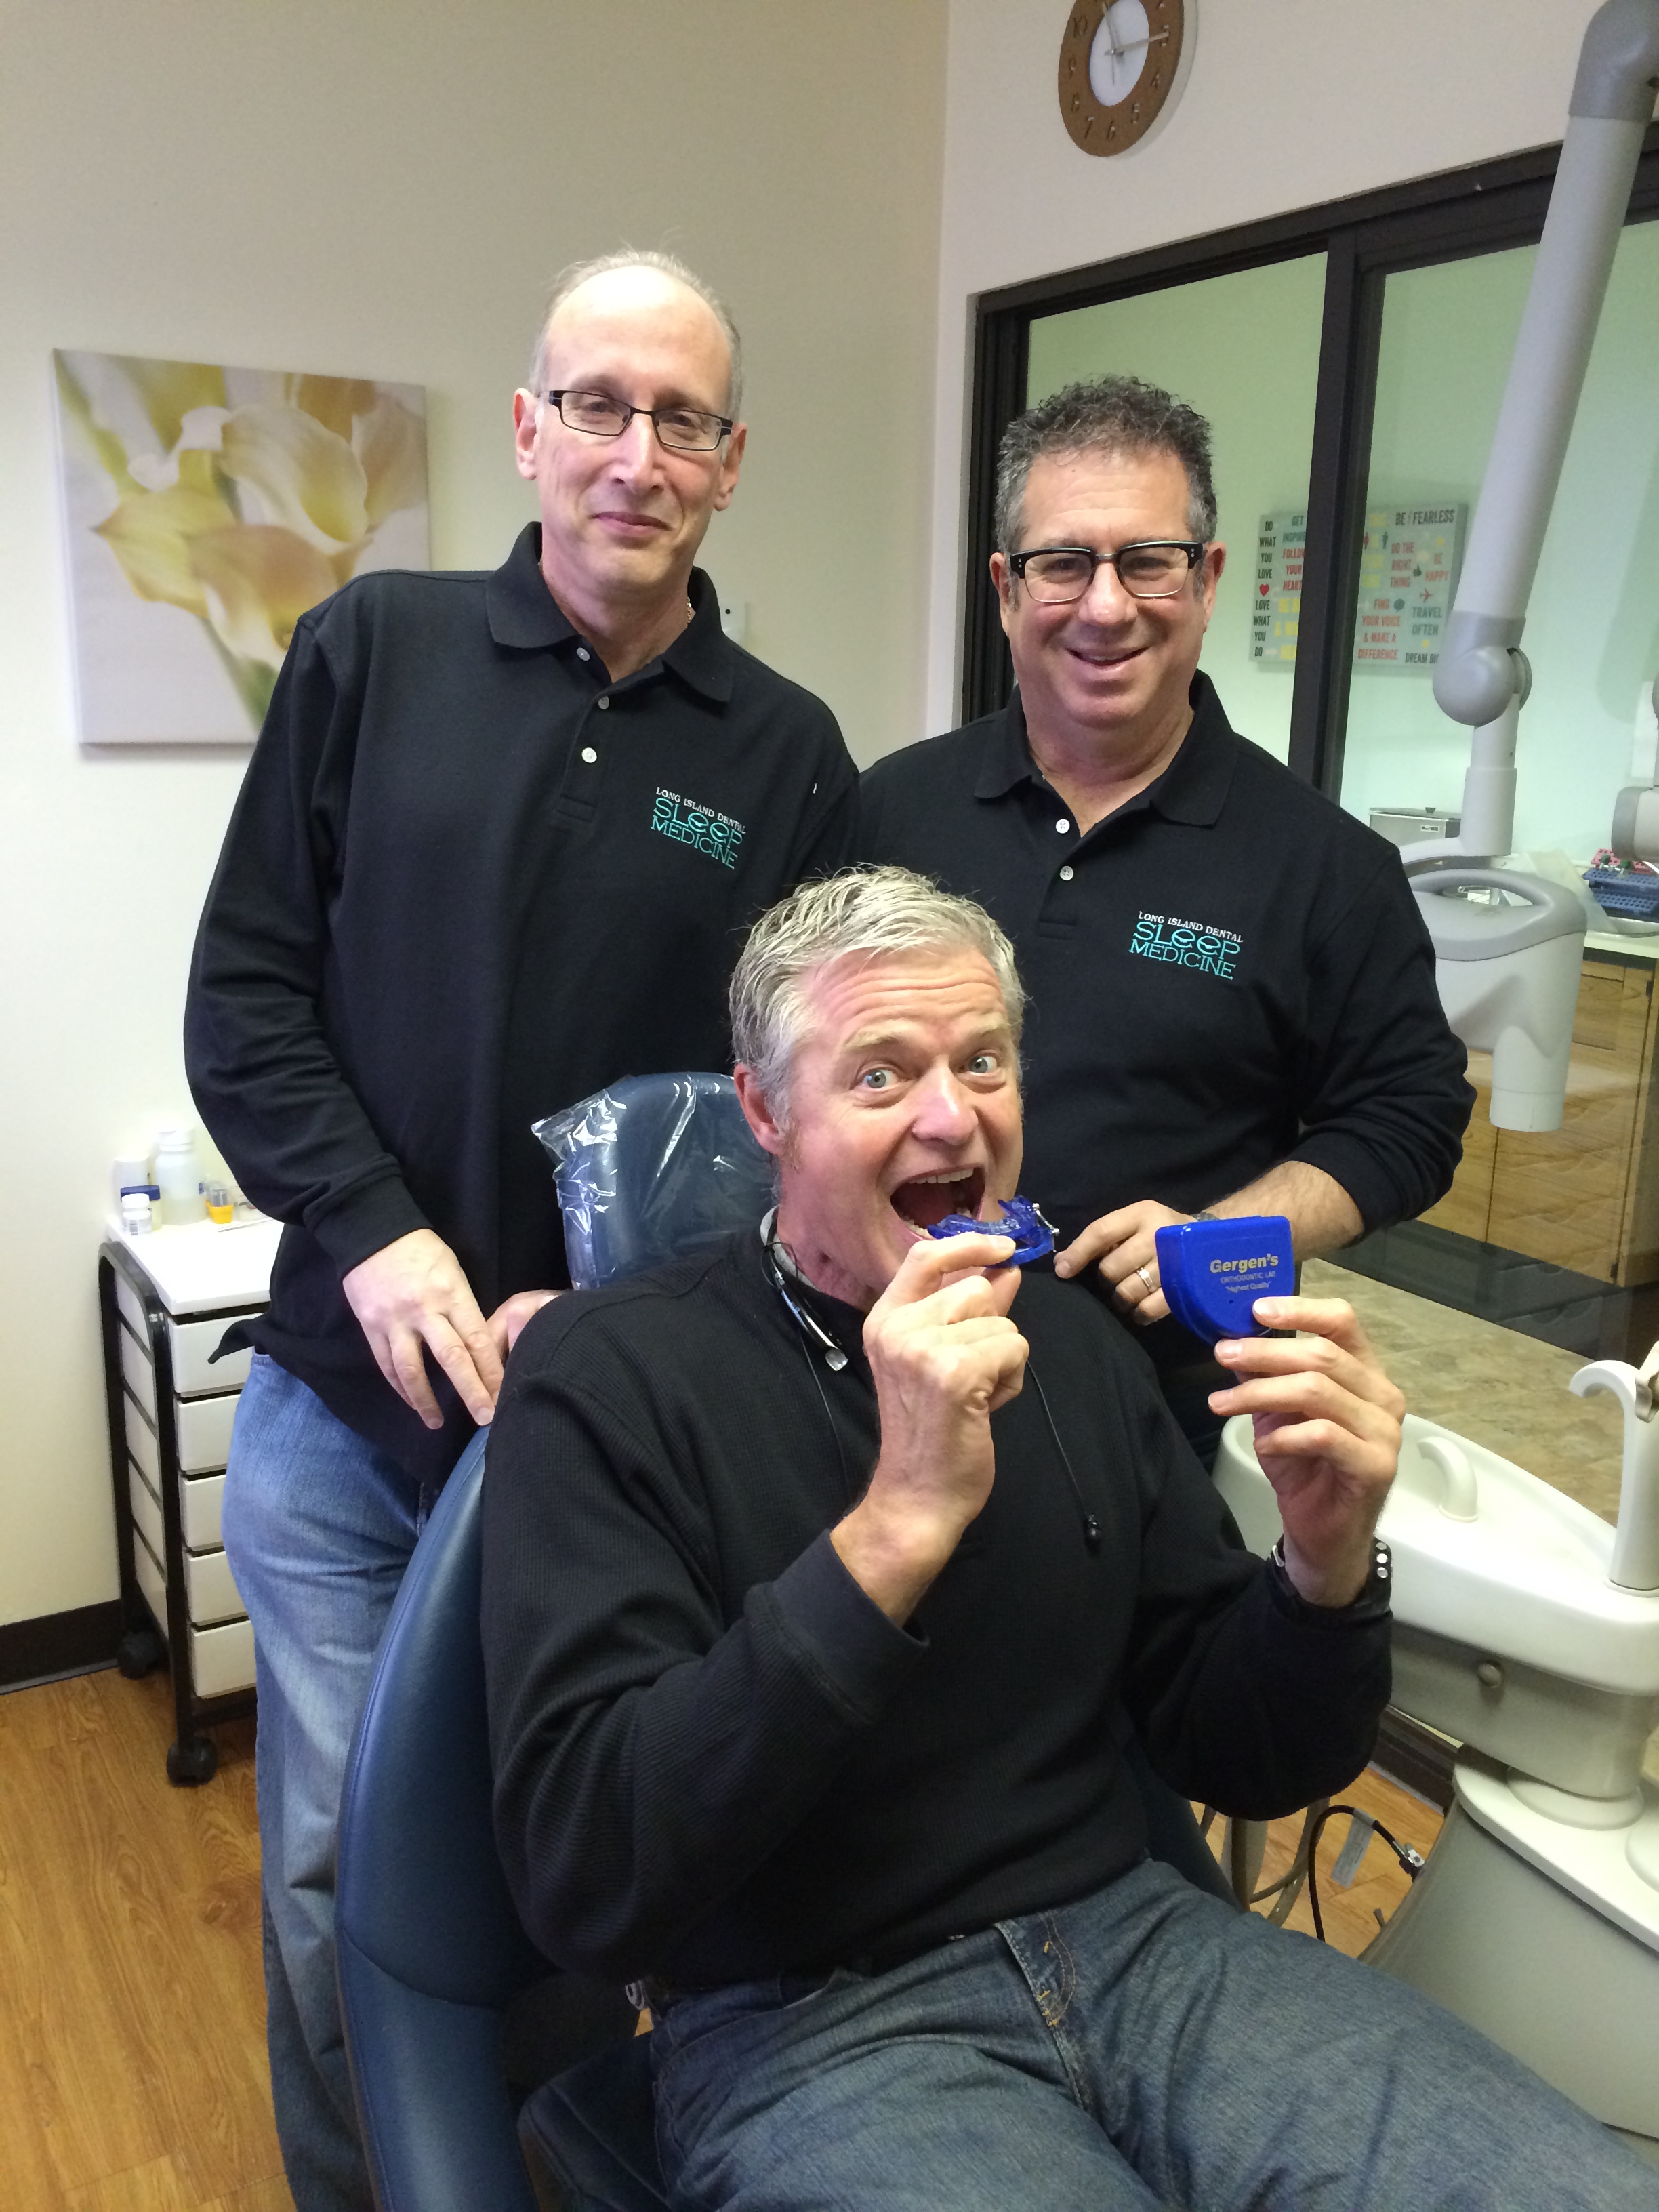 Super Bowl Champion Bart Oates With His Oral Appliance For Sleep Apnea